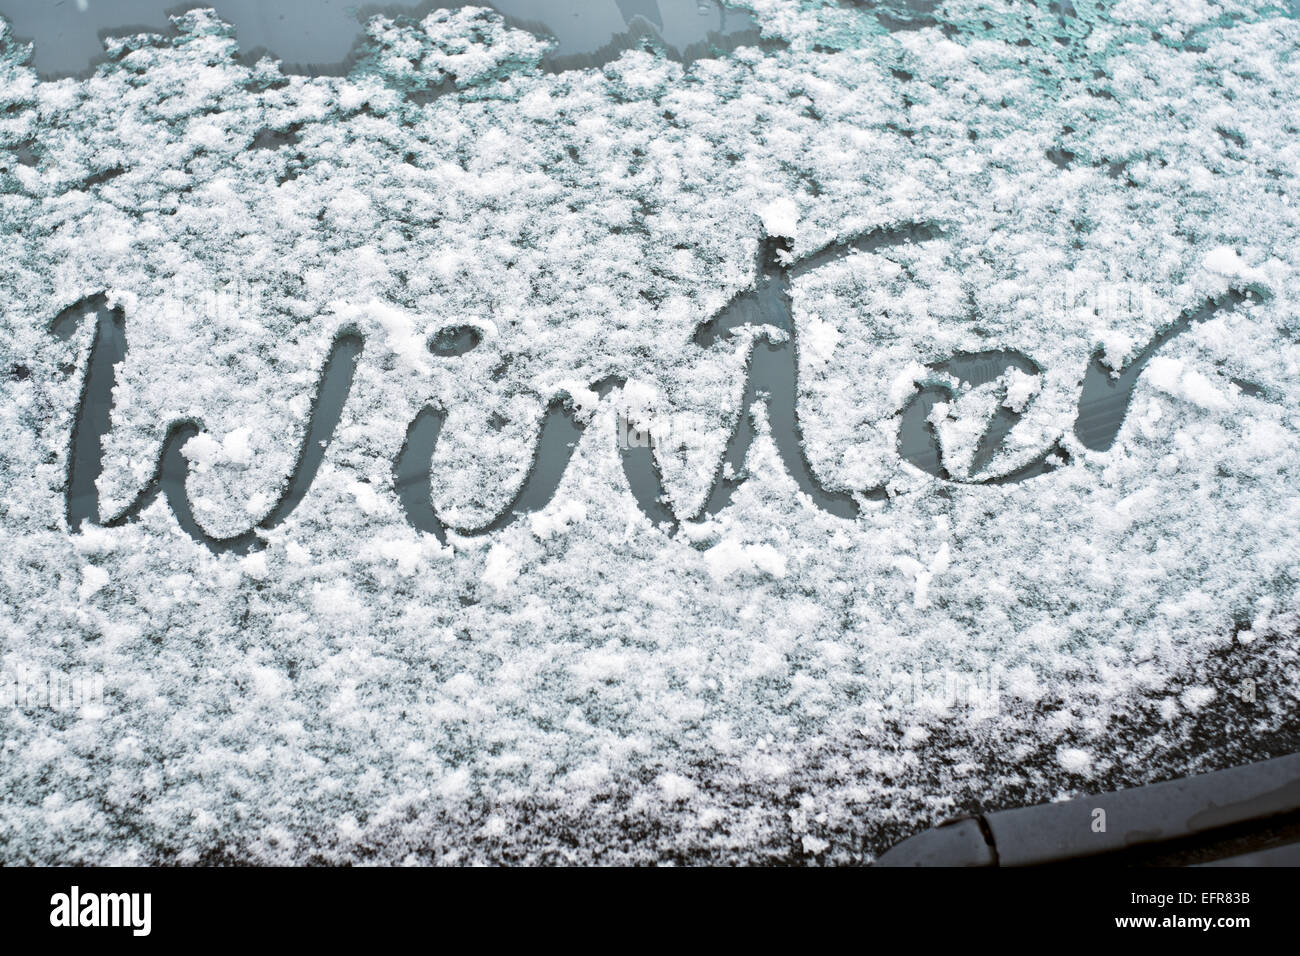 The word winter written on a snow flake covered glass windscreen Stock Photo